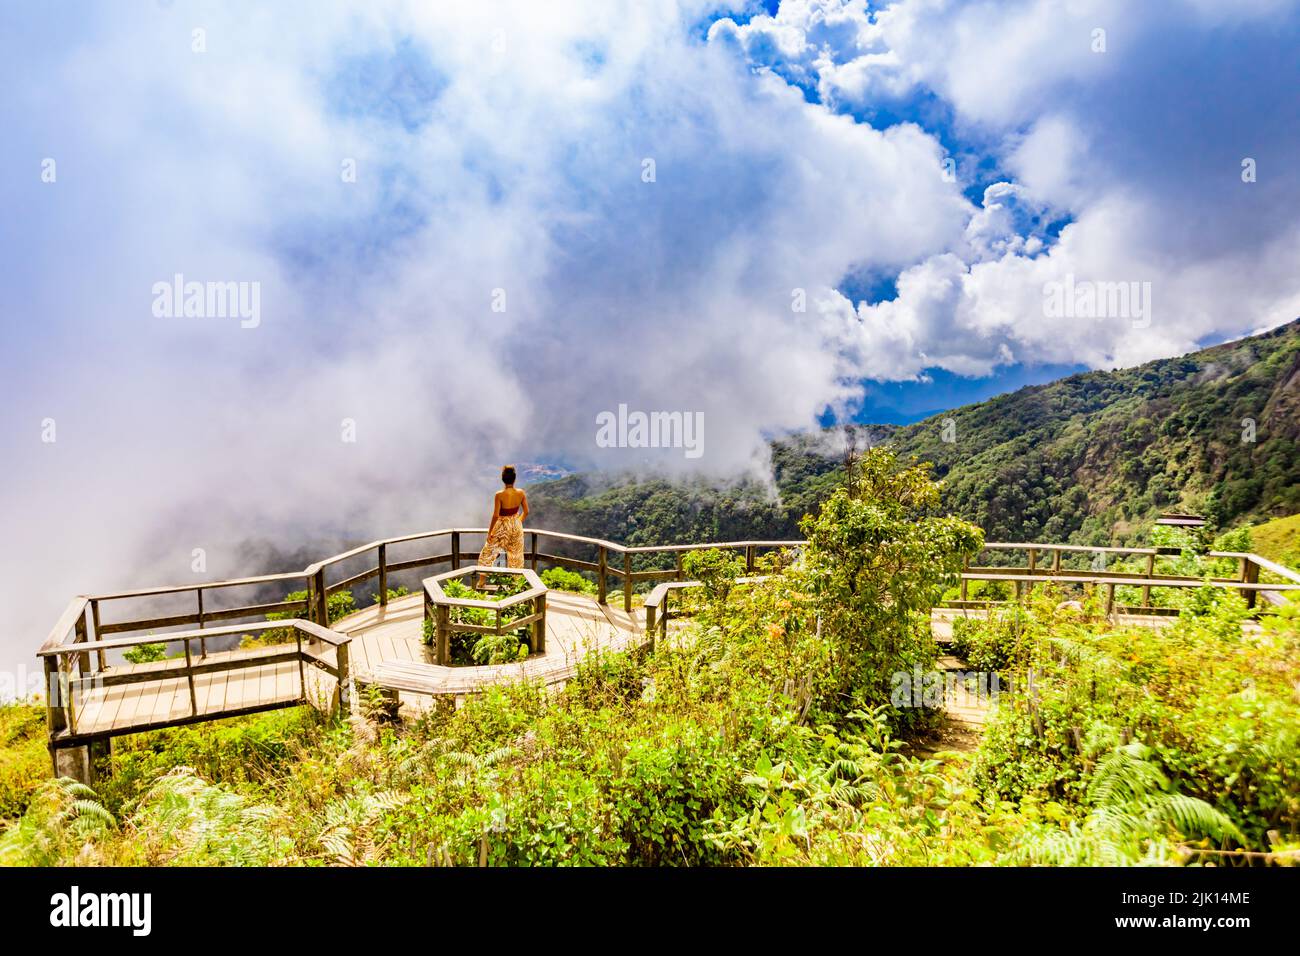 Woman looking out on Kew Mae Pan Nature Trail at Doi Inthanon National Park, Chiang Mai, Thailand, Southeast Asia, Asia Stock Photo